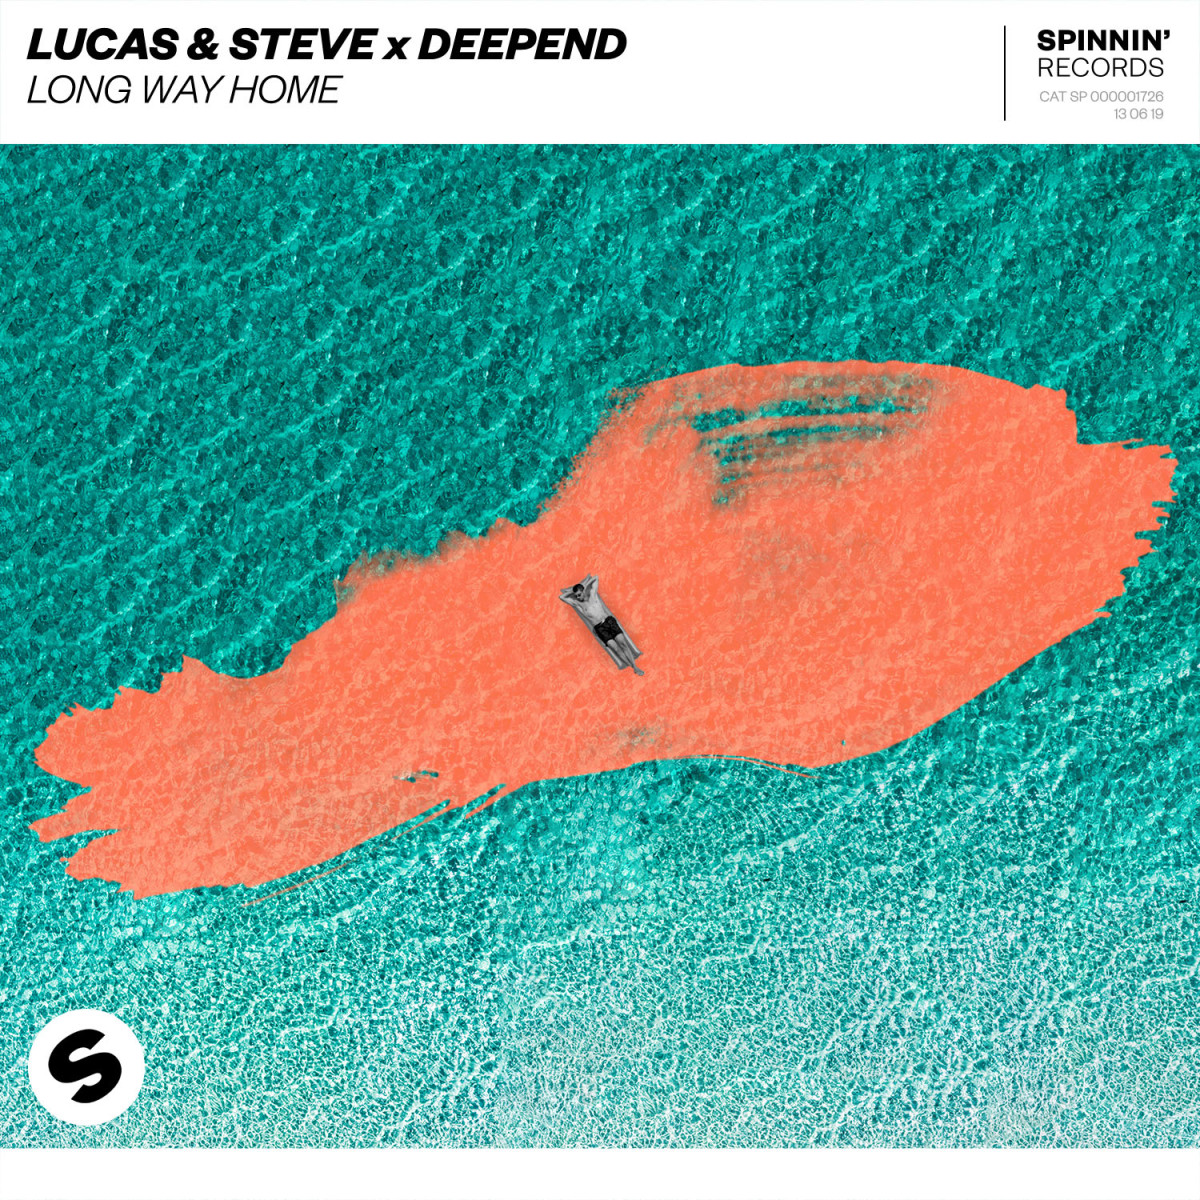 Lucas & Steve x Deepend - "Long Way Home" Album Artwork - Out Now on Spinnin' Records